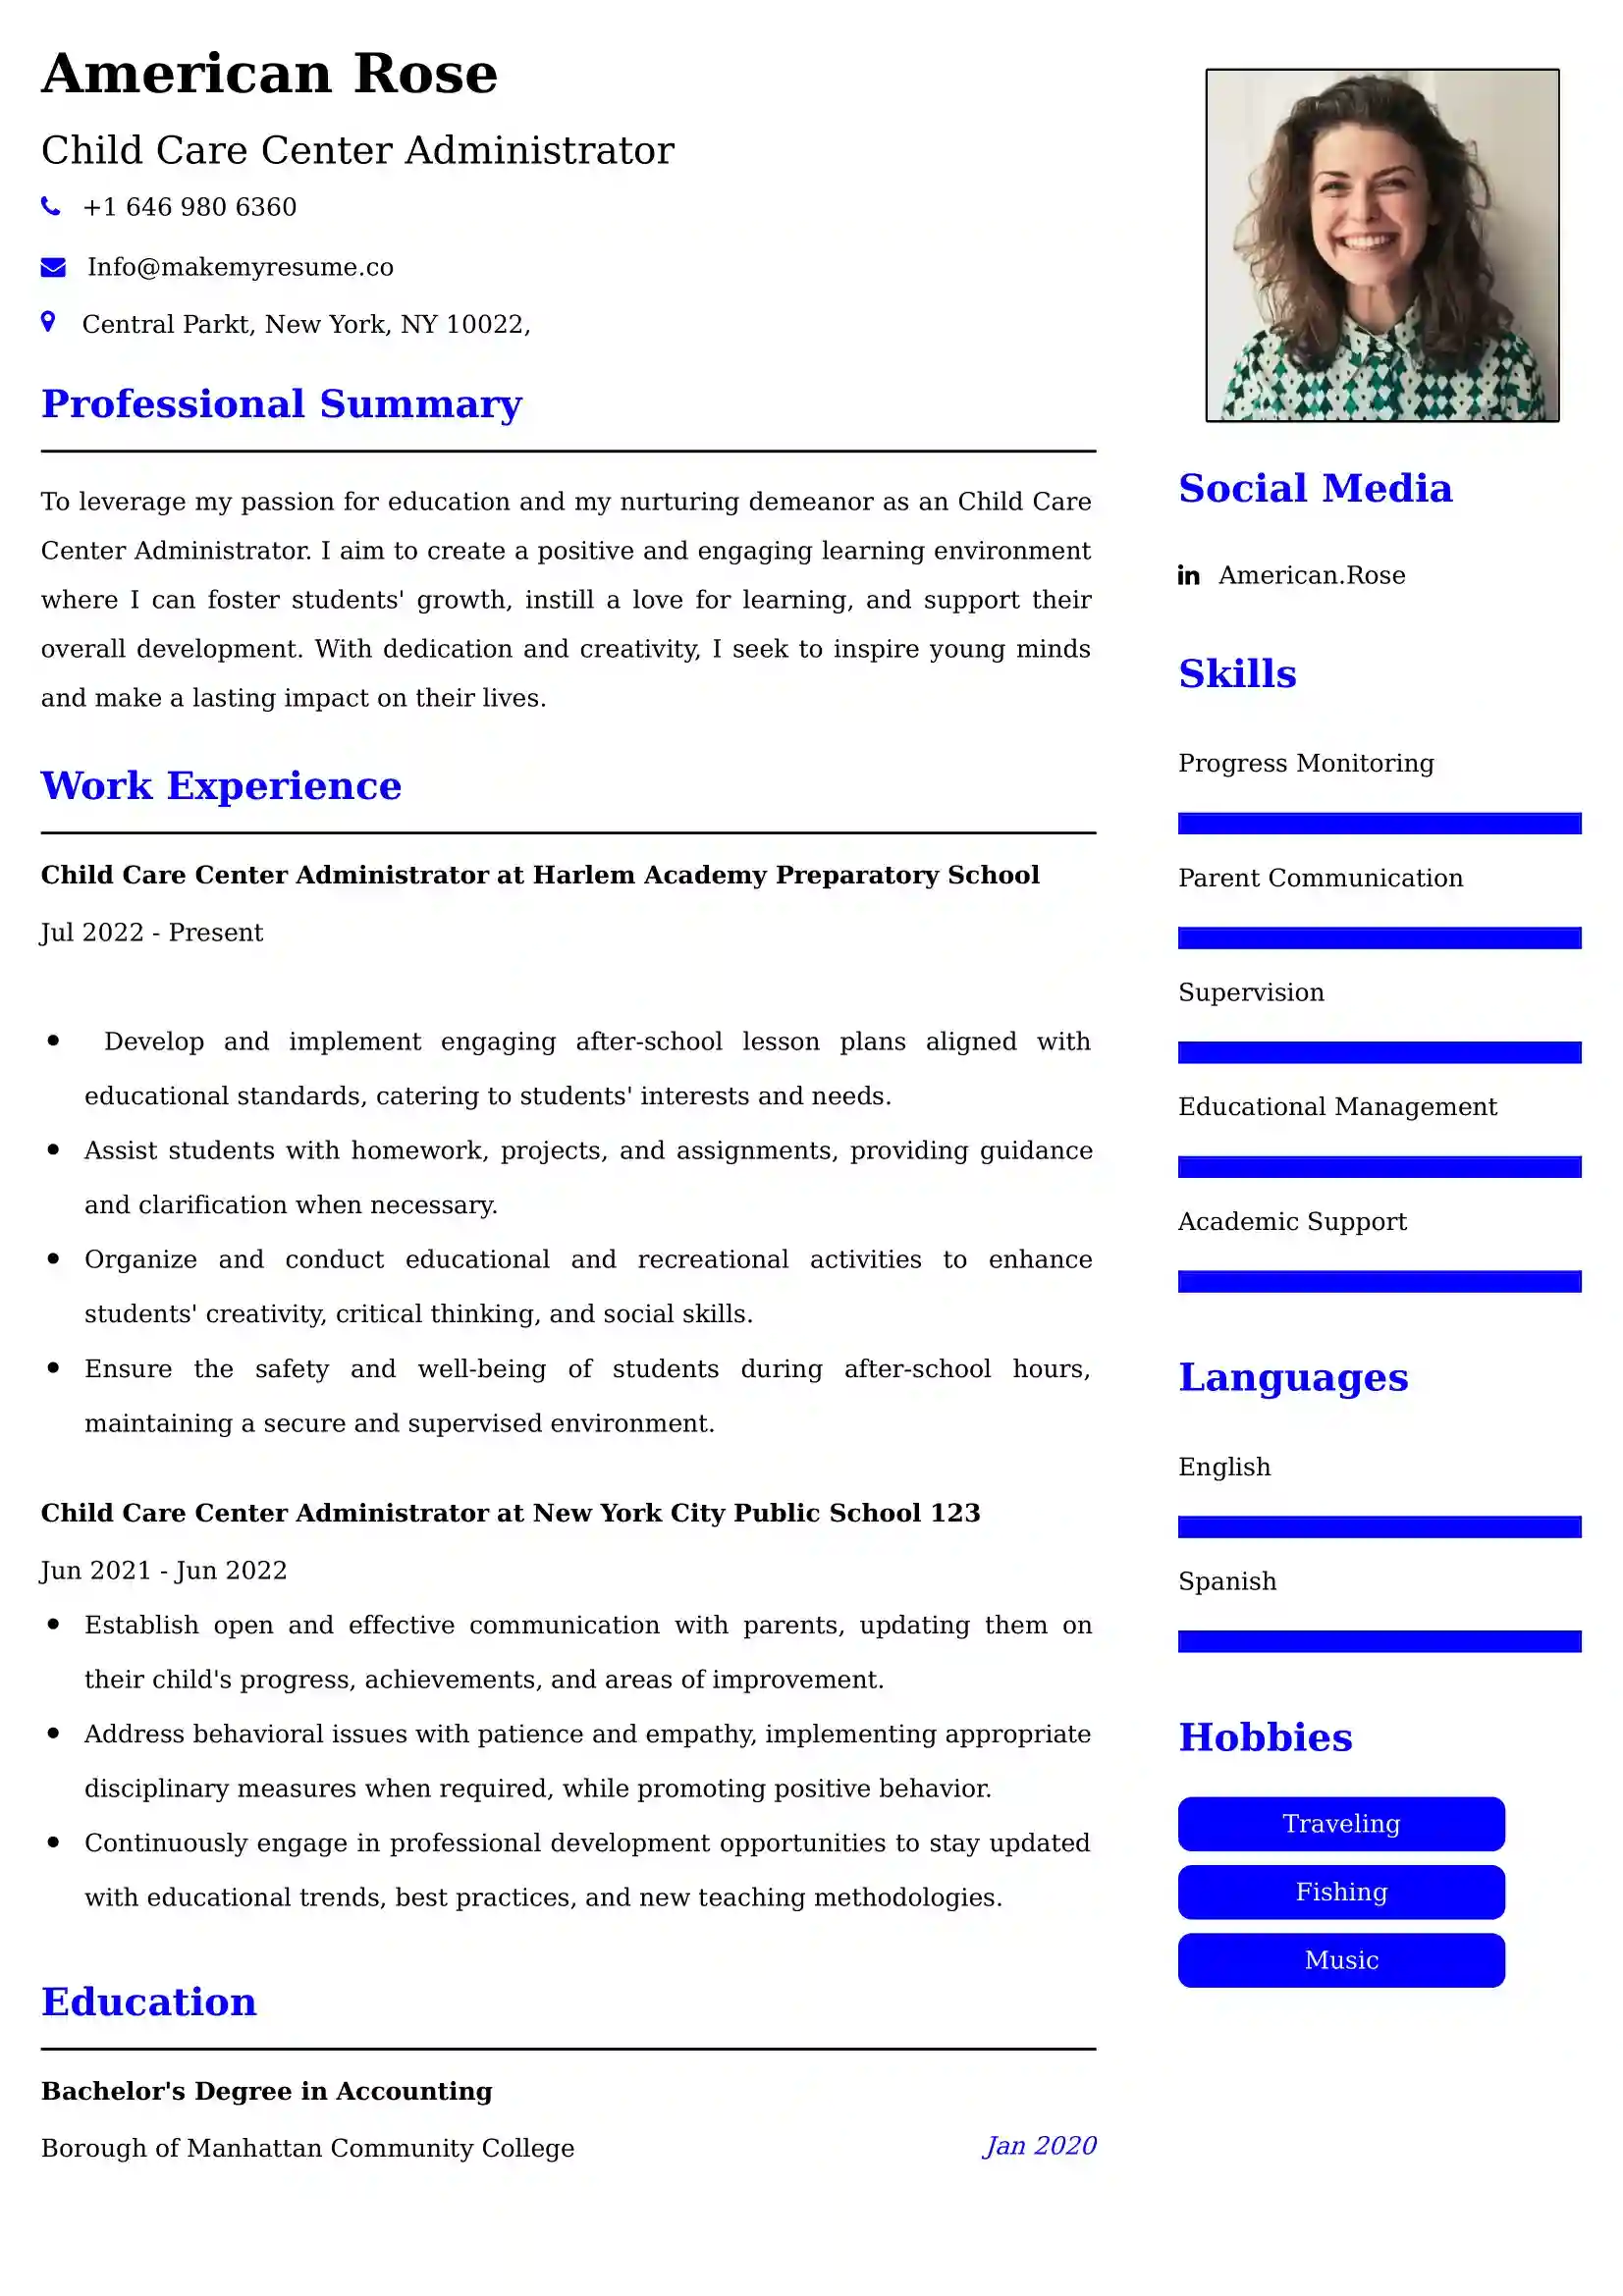 Child Care Center Administrator Resume Examples - UK Format, Latest Template.